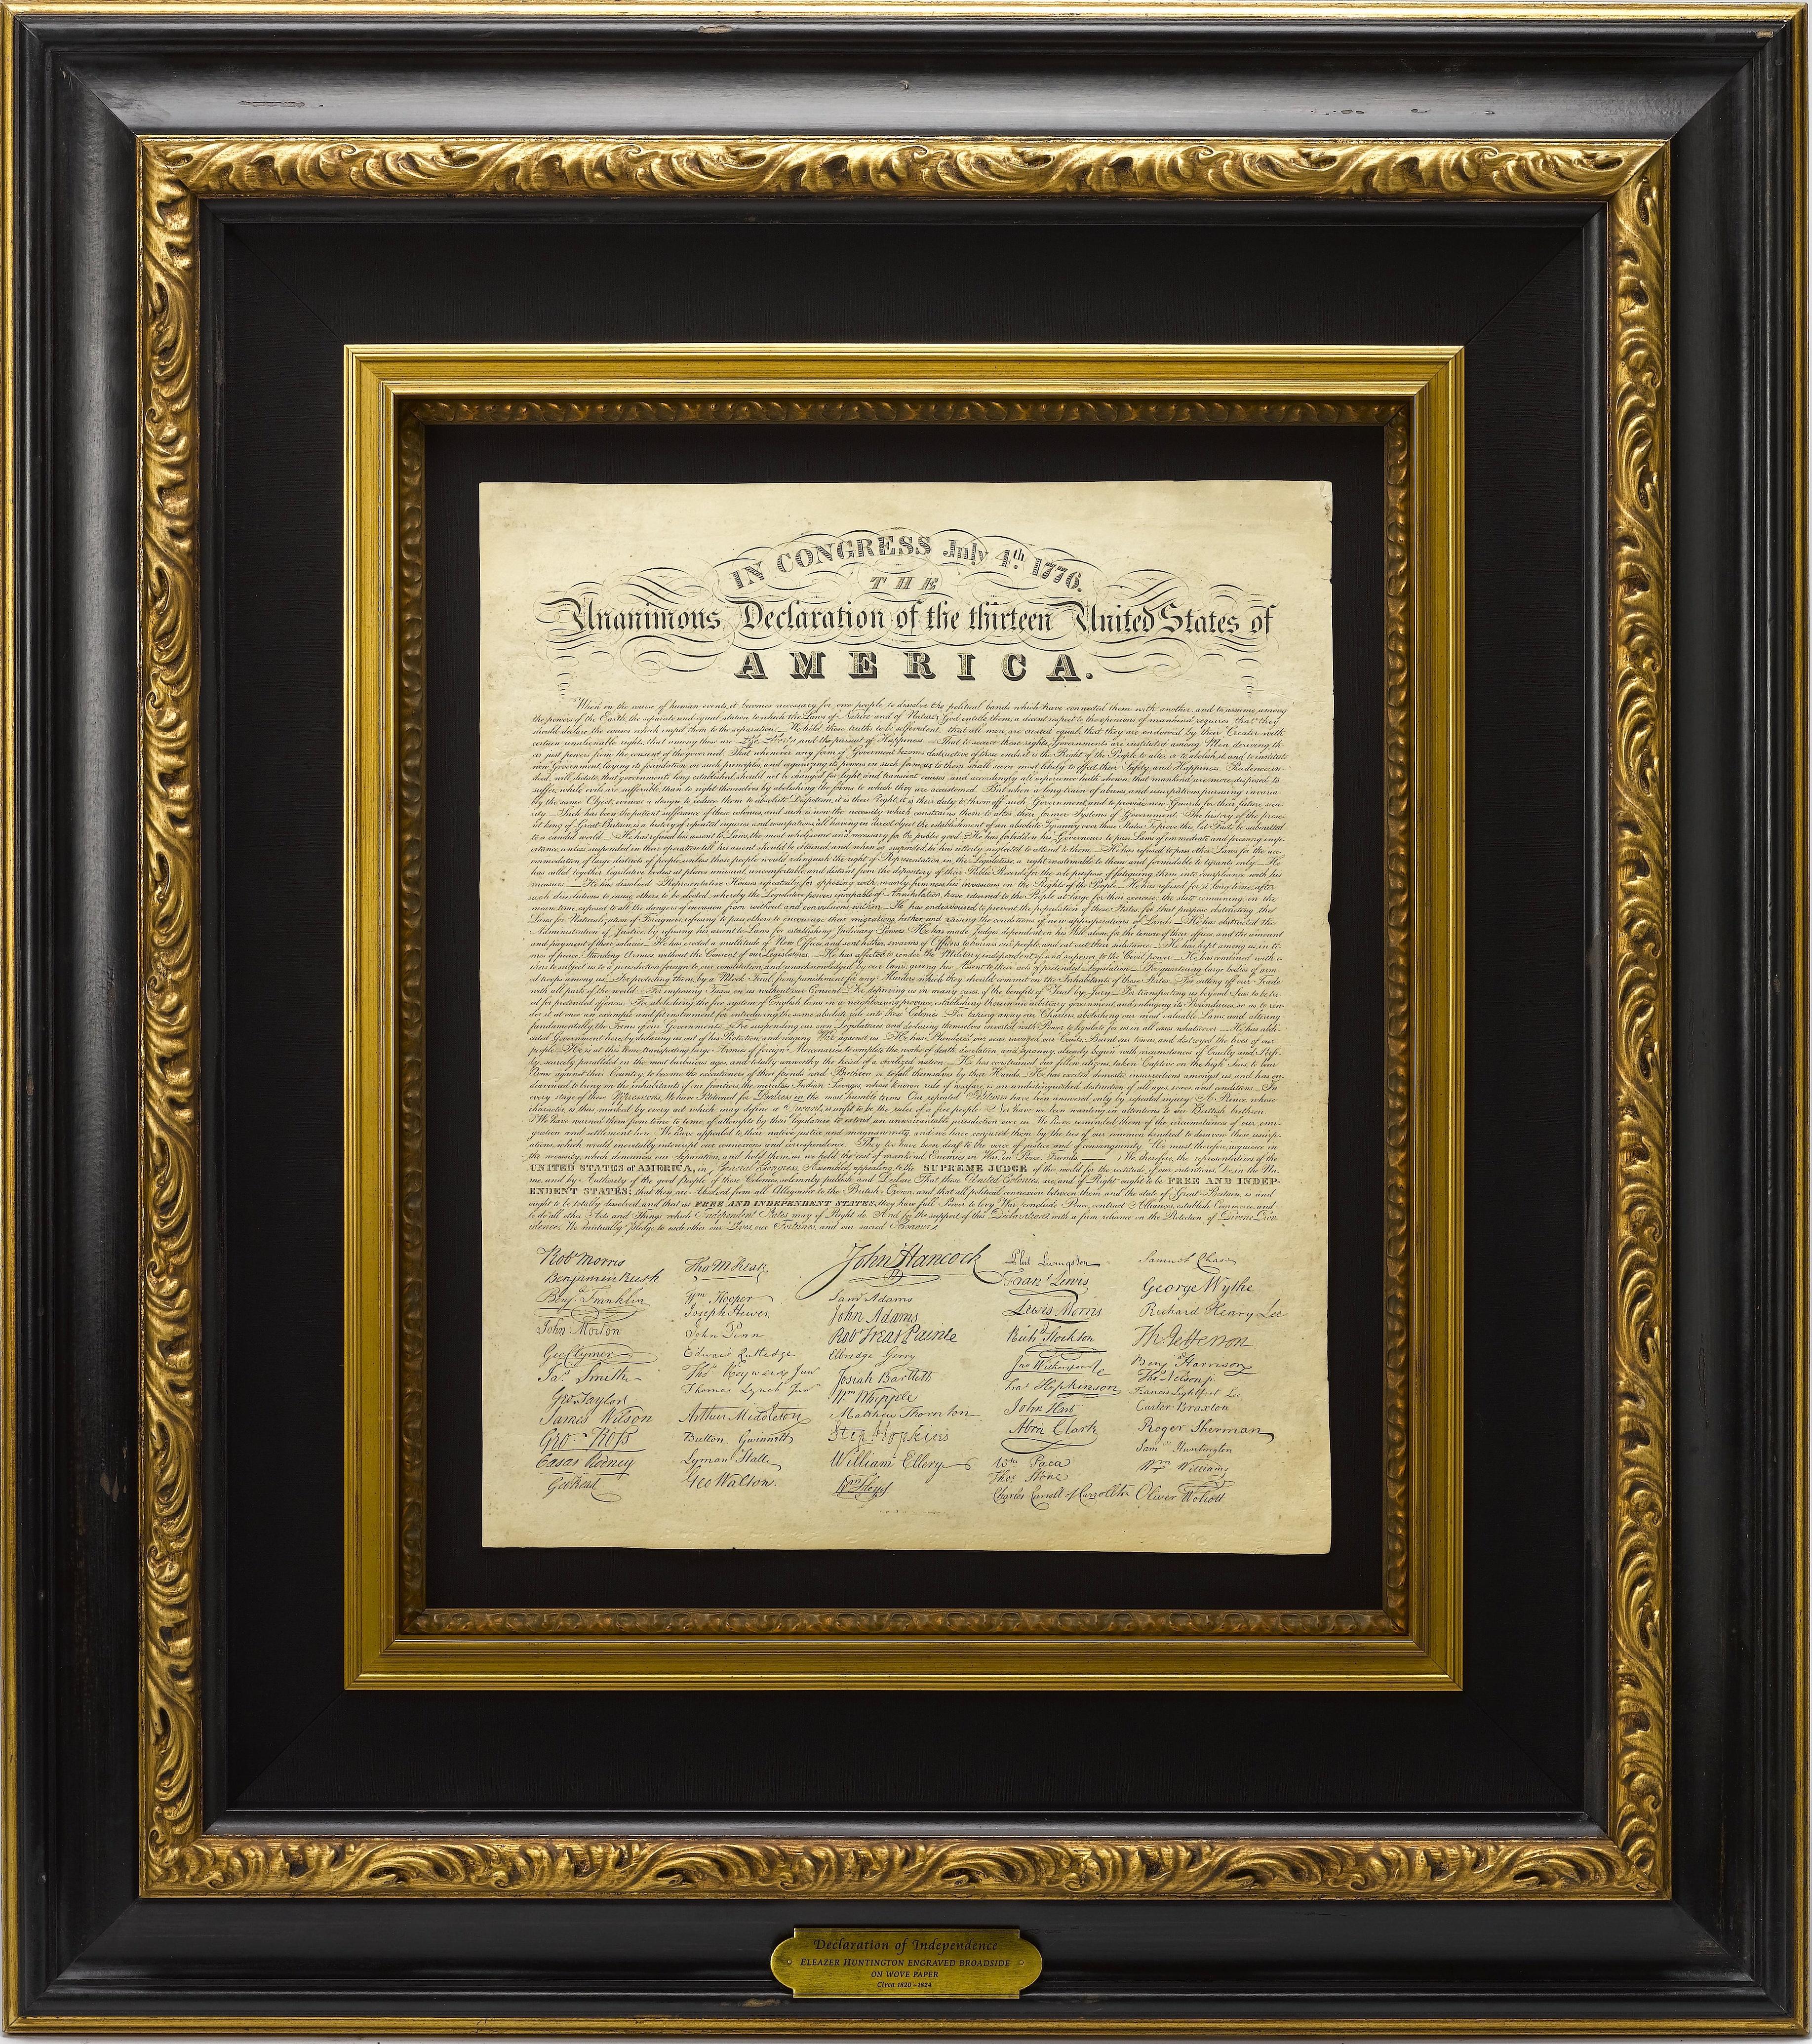 Early 19th Century Declaration of Independence Broadside, Engraved by E. Huntington, circa 1820s